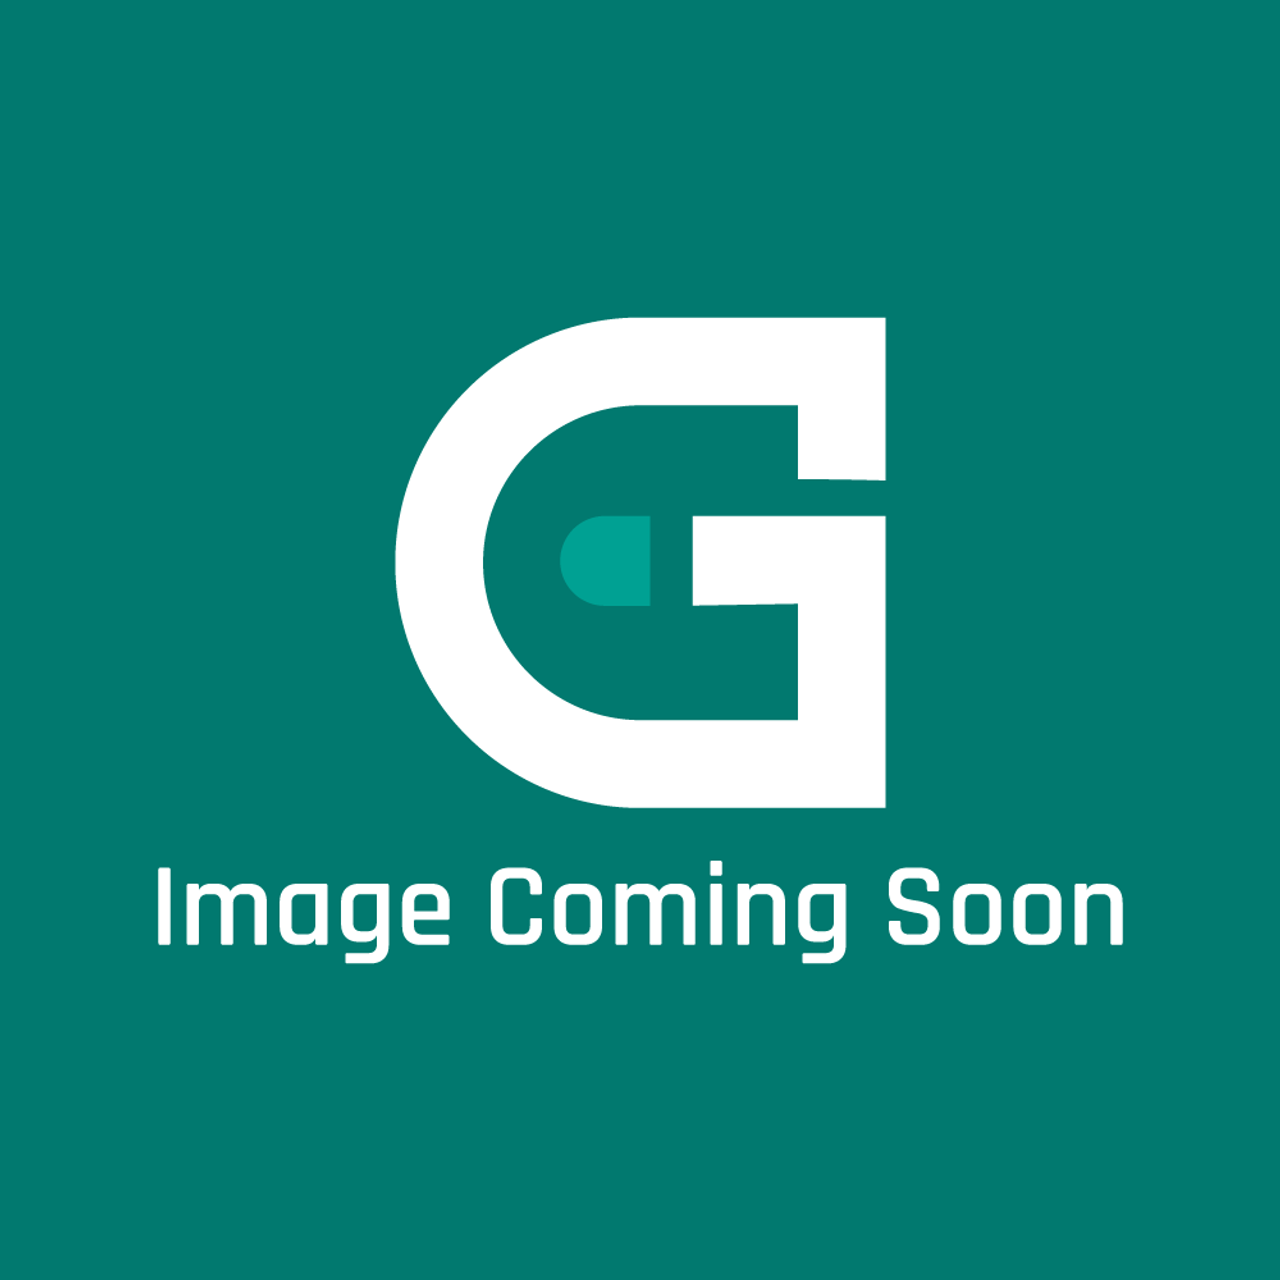 Garland 2248000 - Flue 15In Gd-15G - Image Coming Soon!